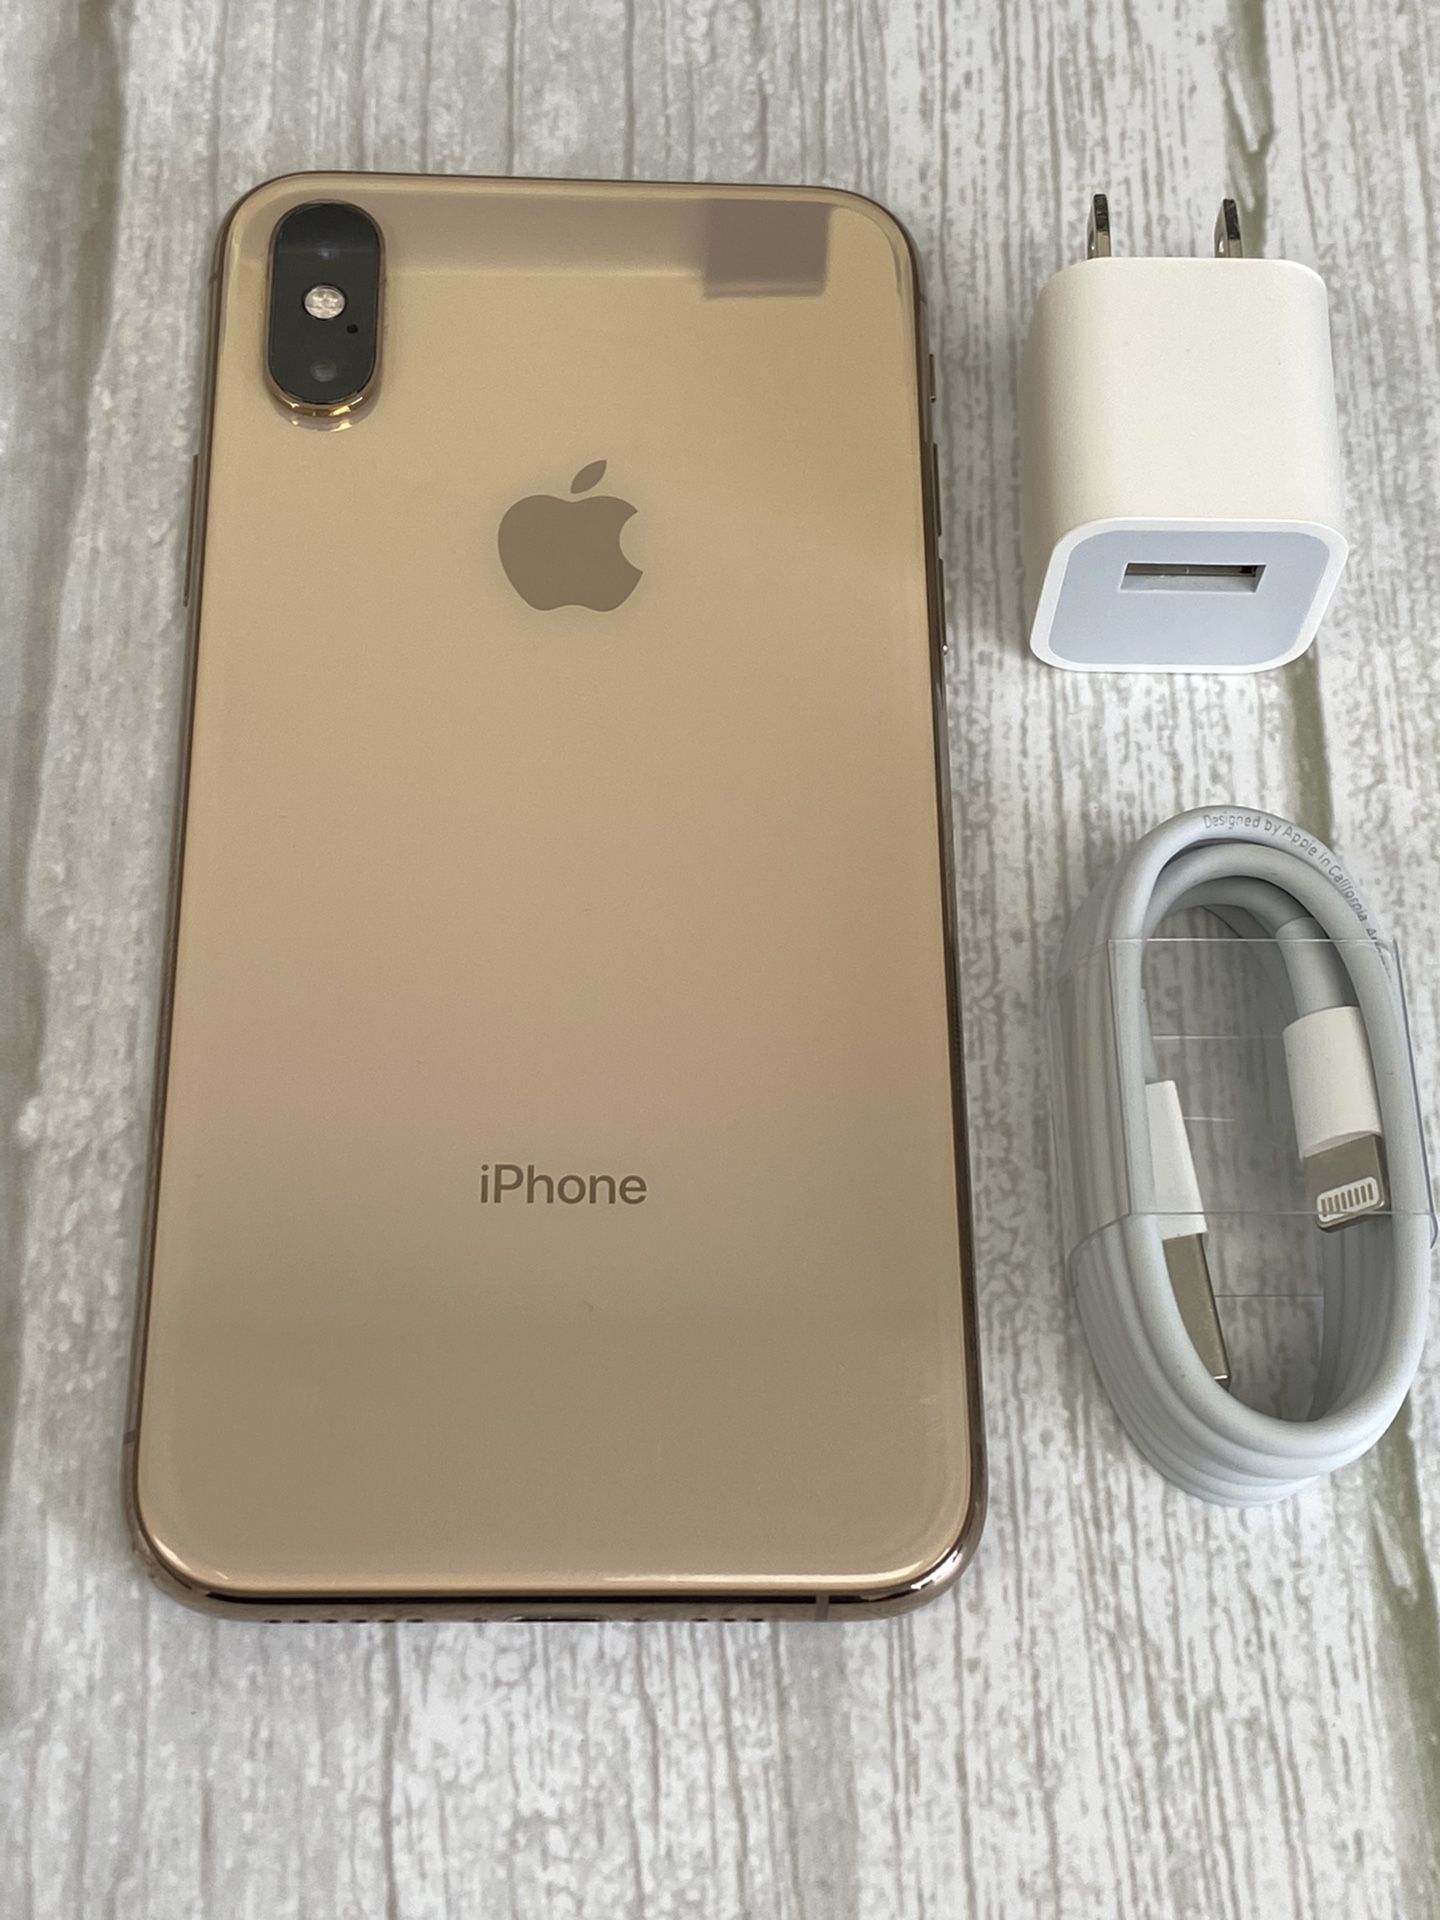 iPHONE XS - 64GB - GOLD AND BLACK - UNLOCKED !! 100% WORKING !!